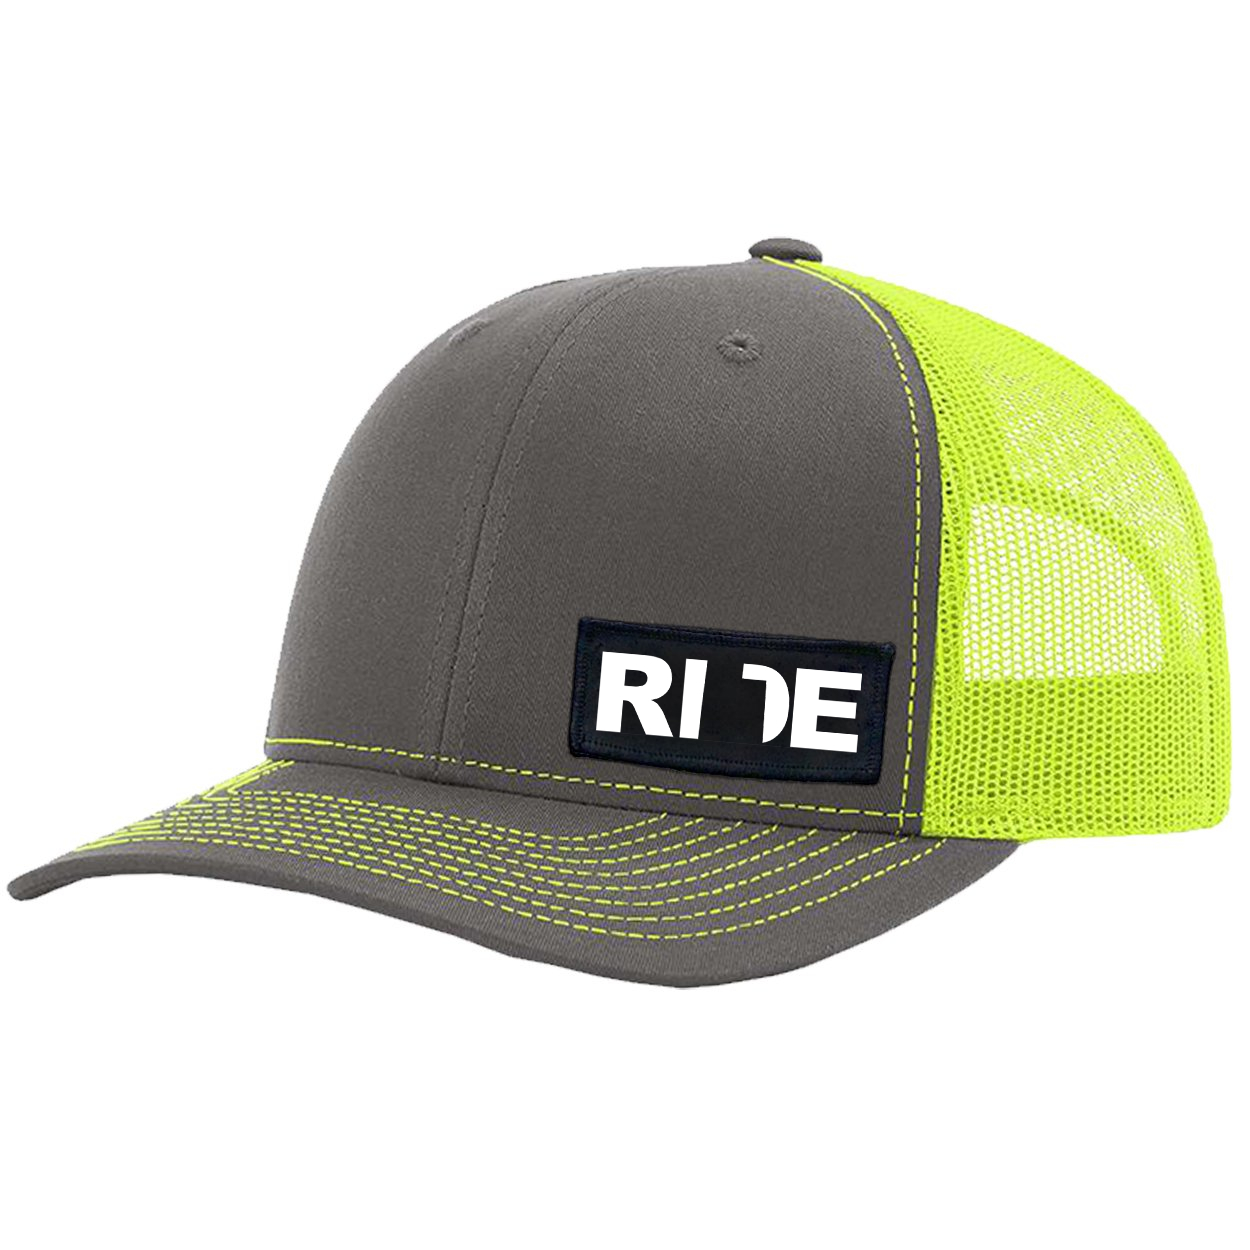 Ride Utah Night Out Woven Patch Snapback Trucker Hat Charcoal/Neon Yellow (White Logo)